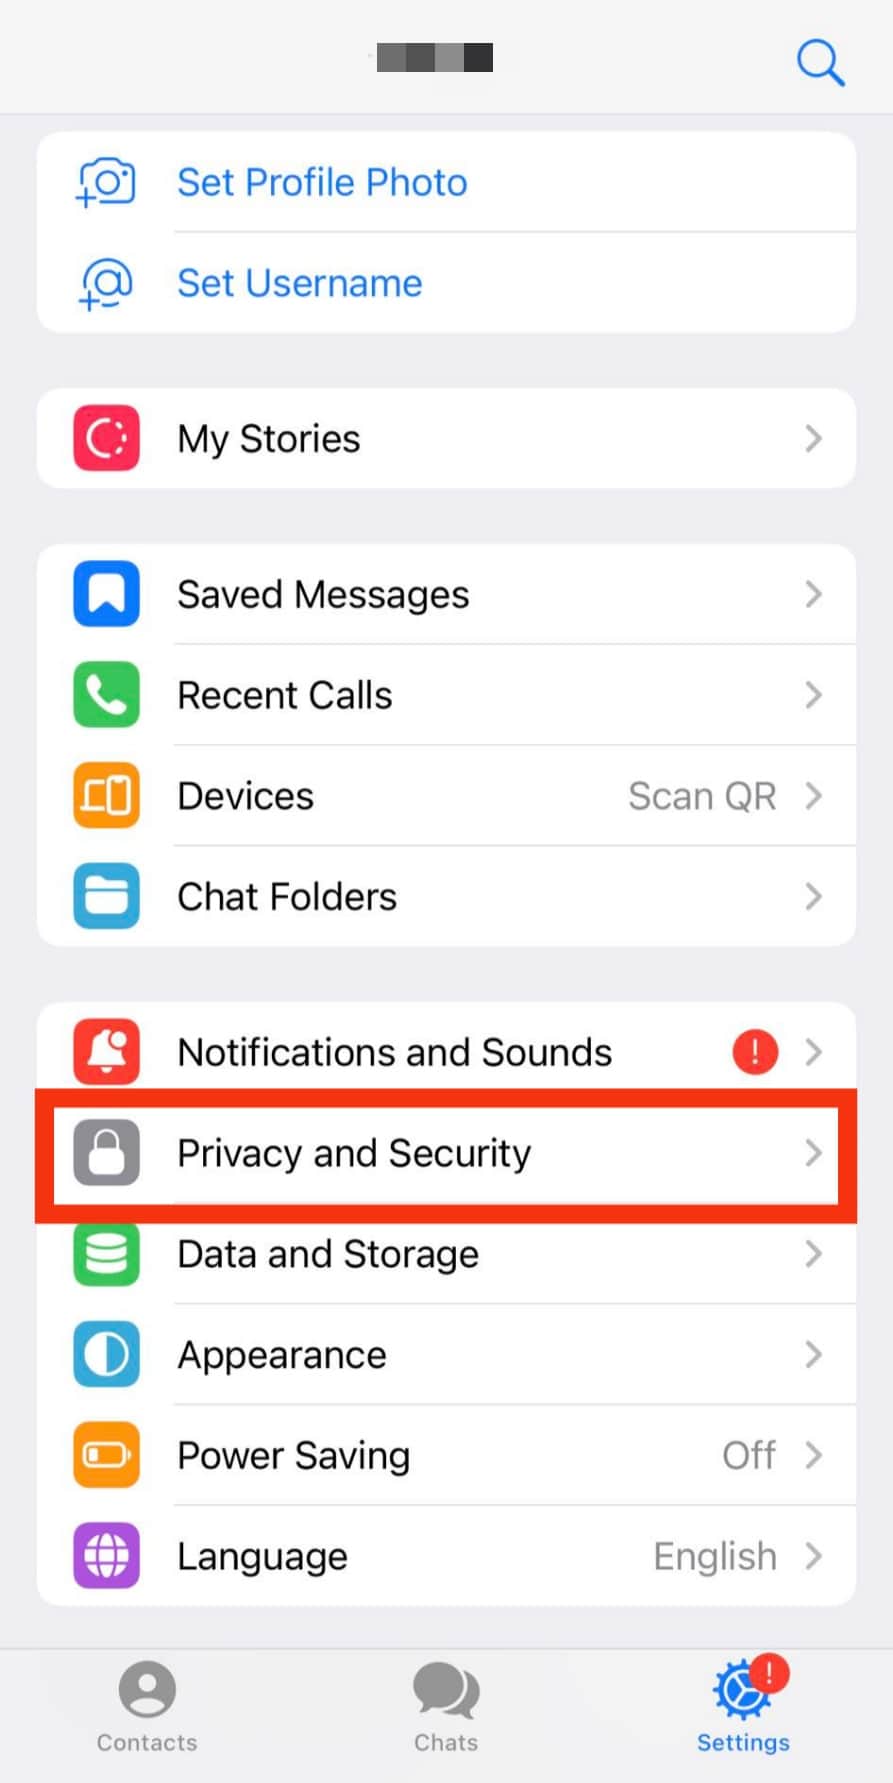 Select The Privacy And Security Option